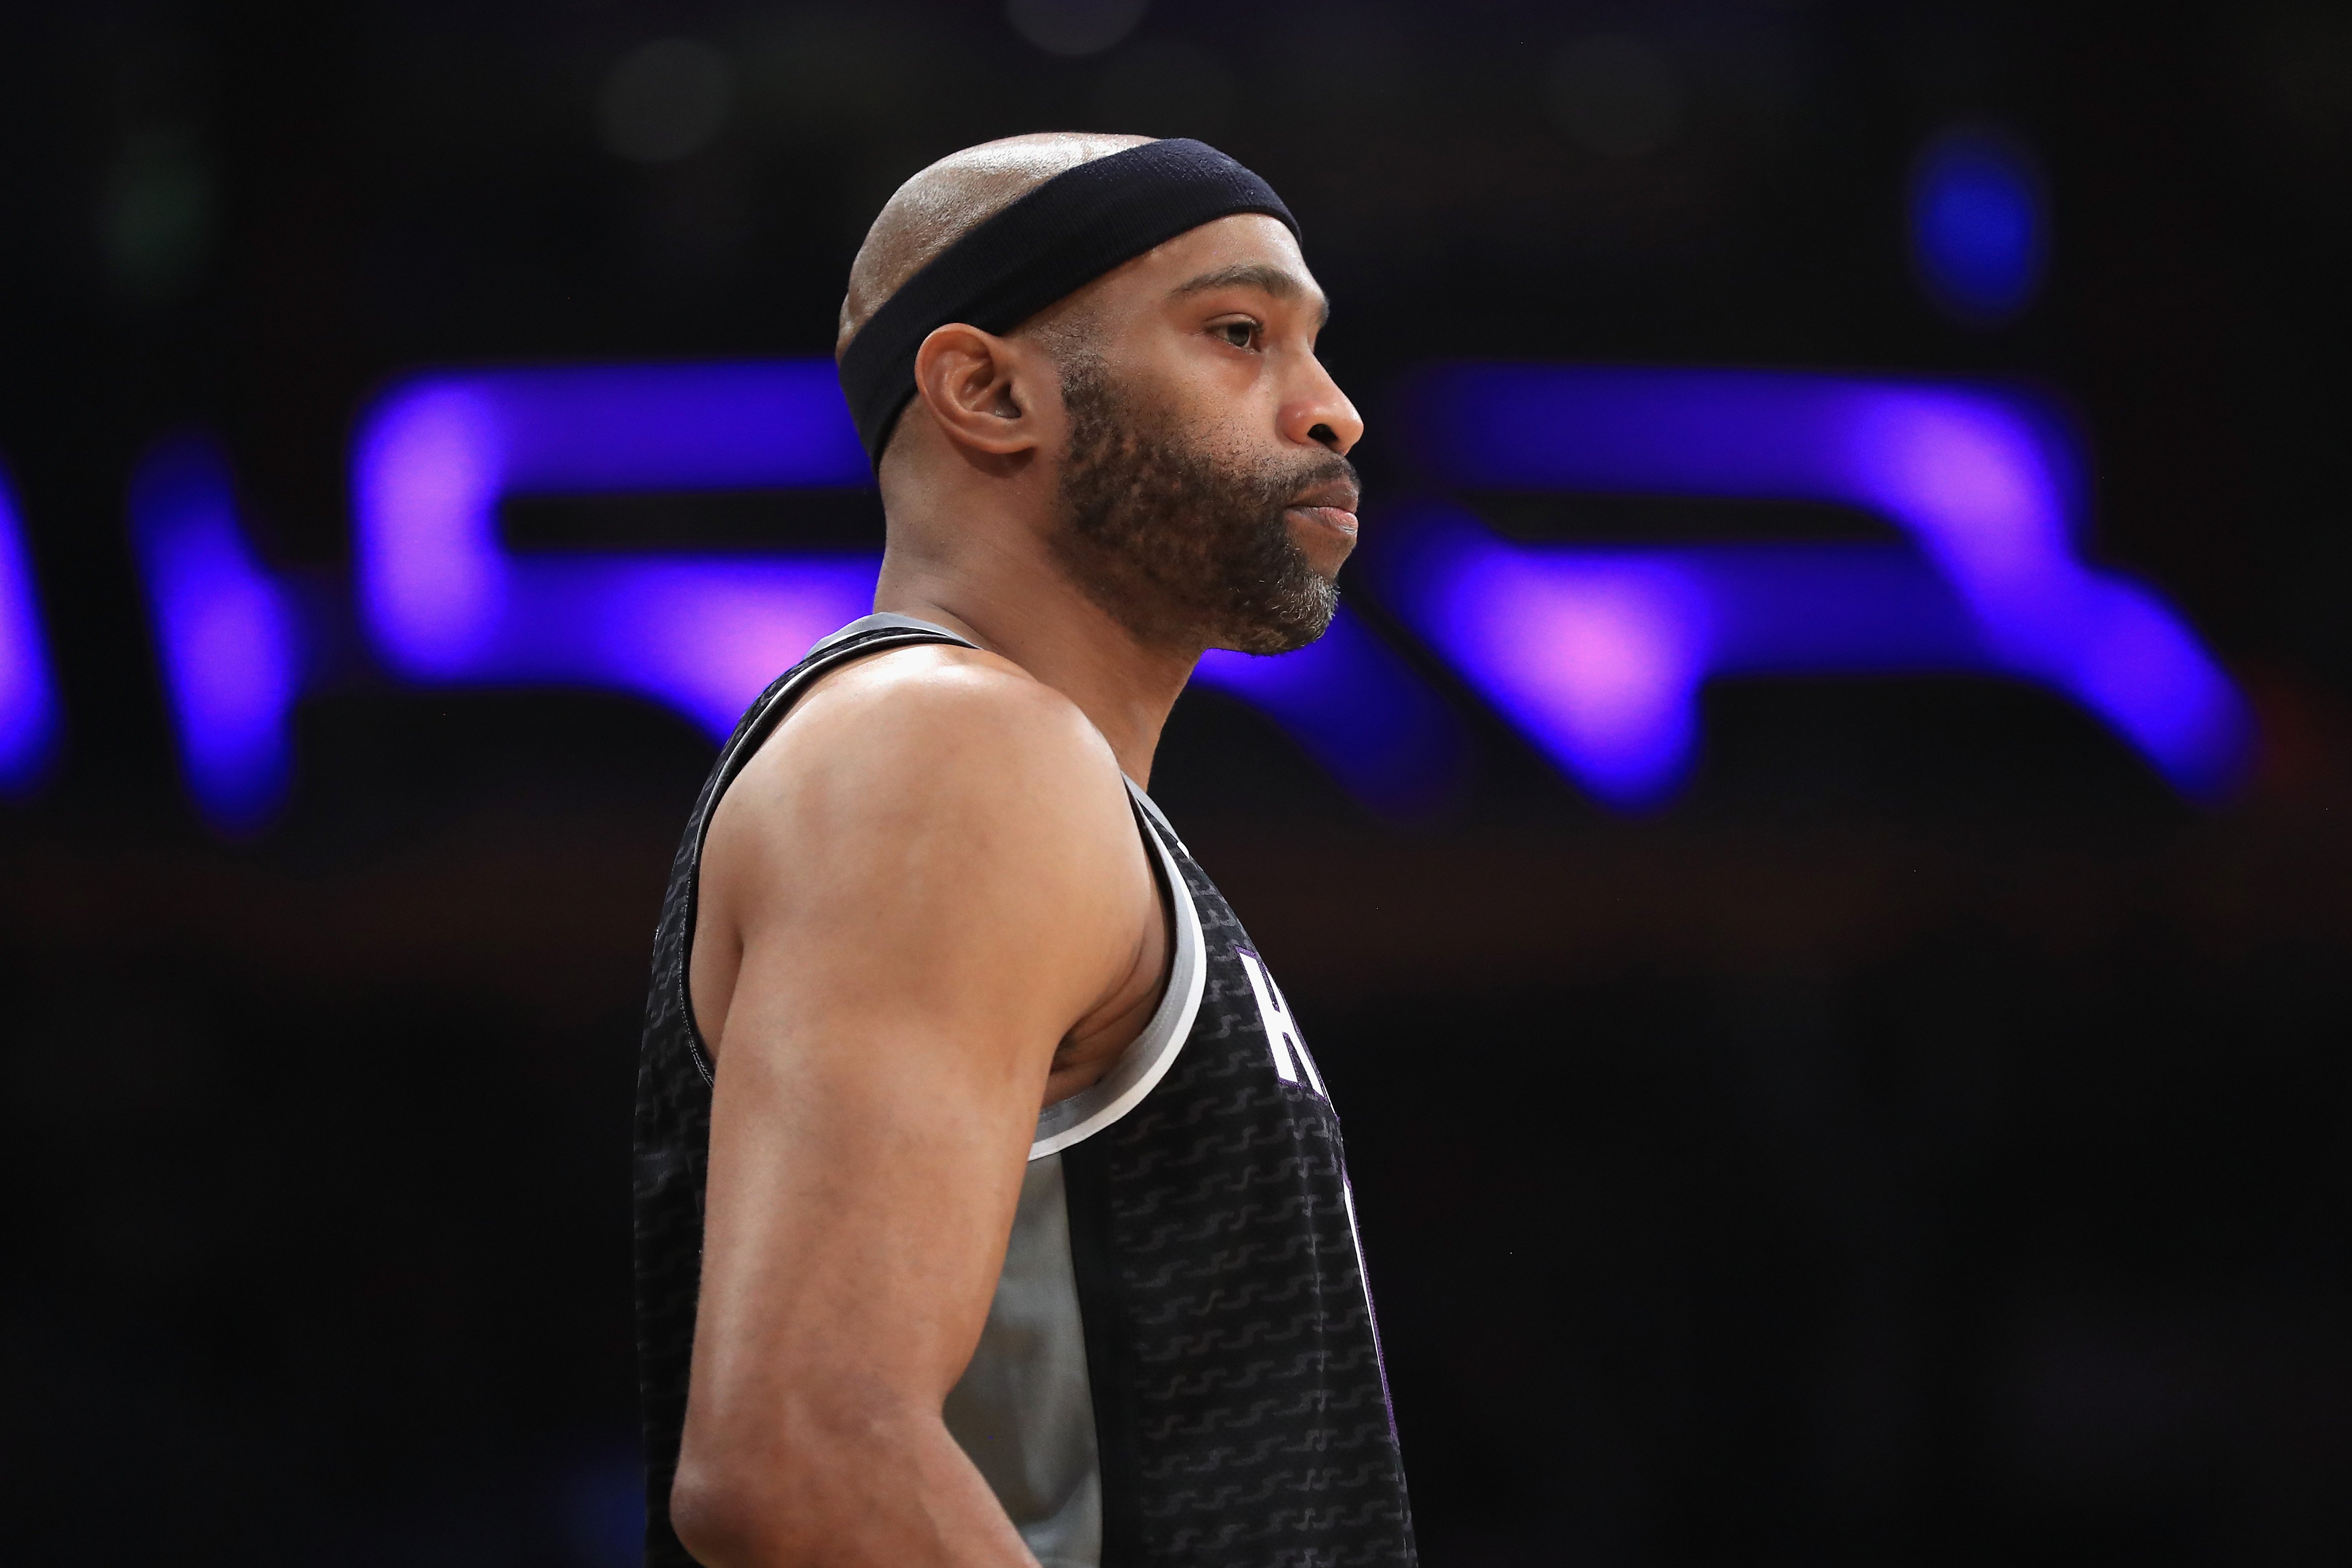 Vince Carter #15 of the Sacramento Kings looks on during the first half of a game against the Los Angeles Lakers at Staples Center on January 9, 2018 in Los Angeles, California. | Source: Getty Images